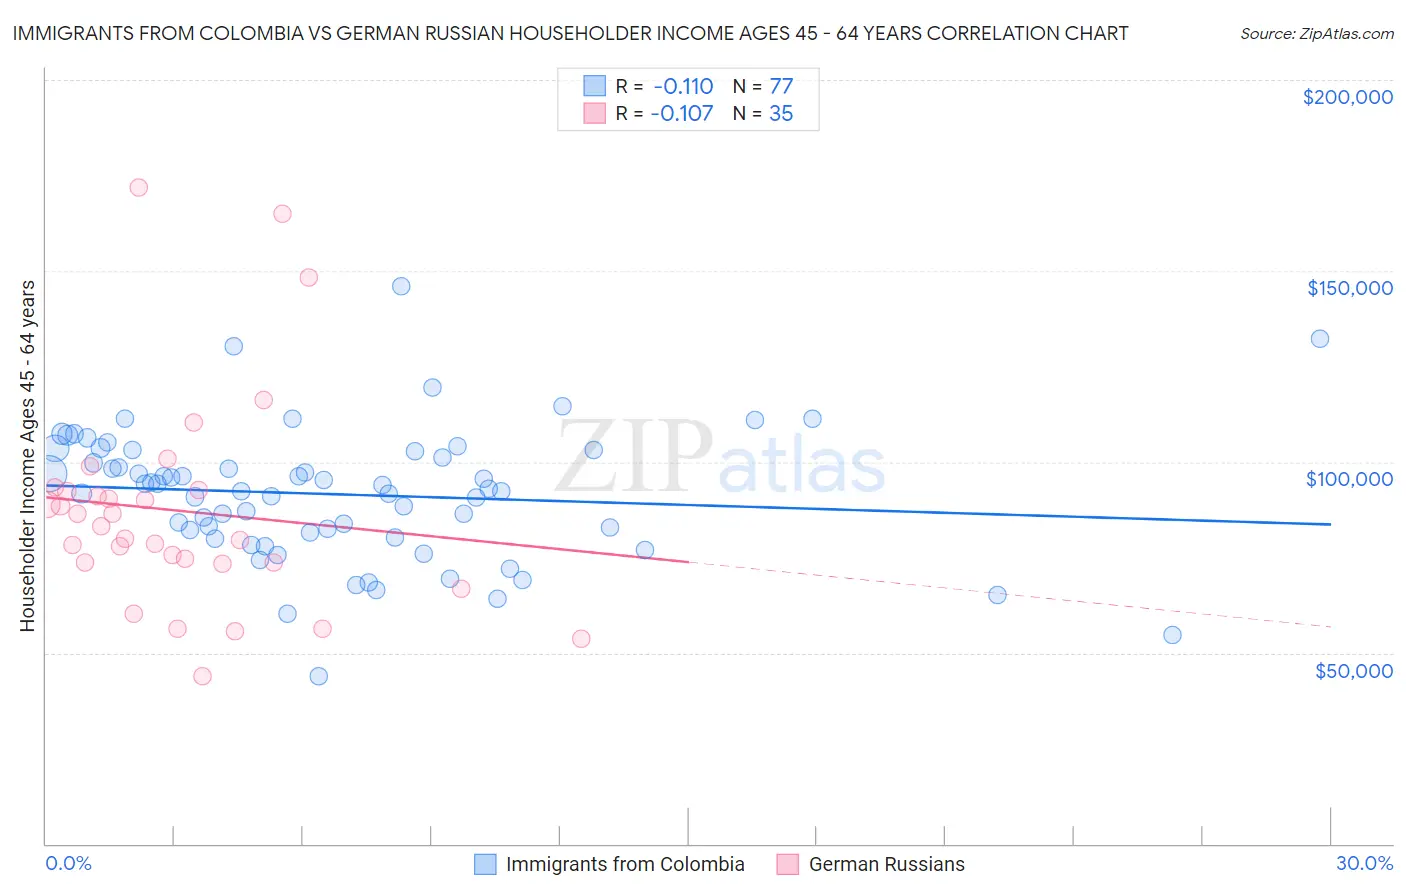 Immigrants from Colombia vs German Russian Householder Income Ages 45 - 64 years